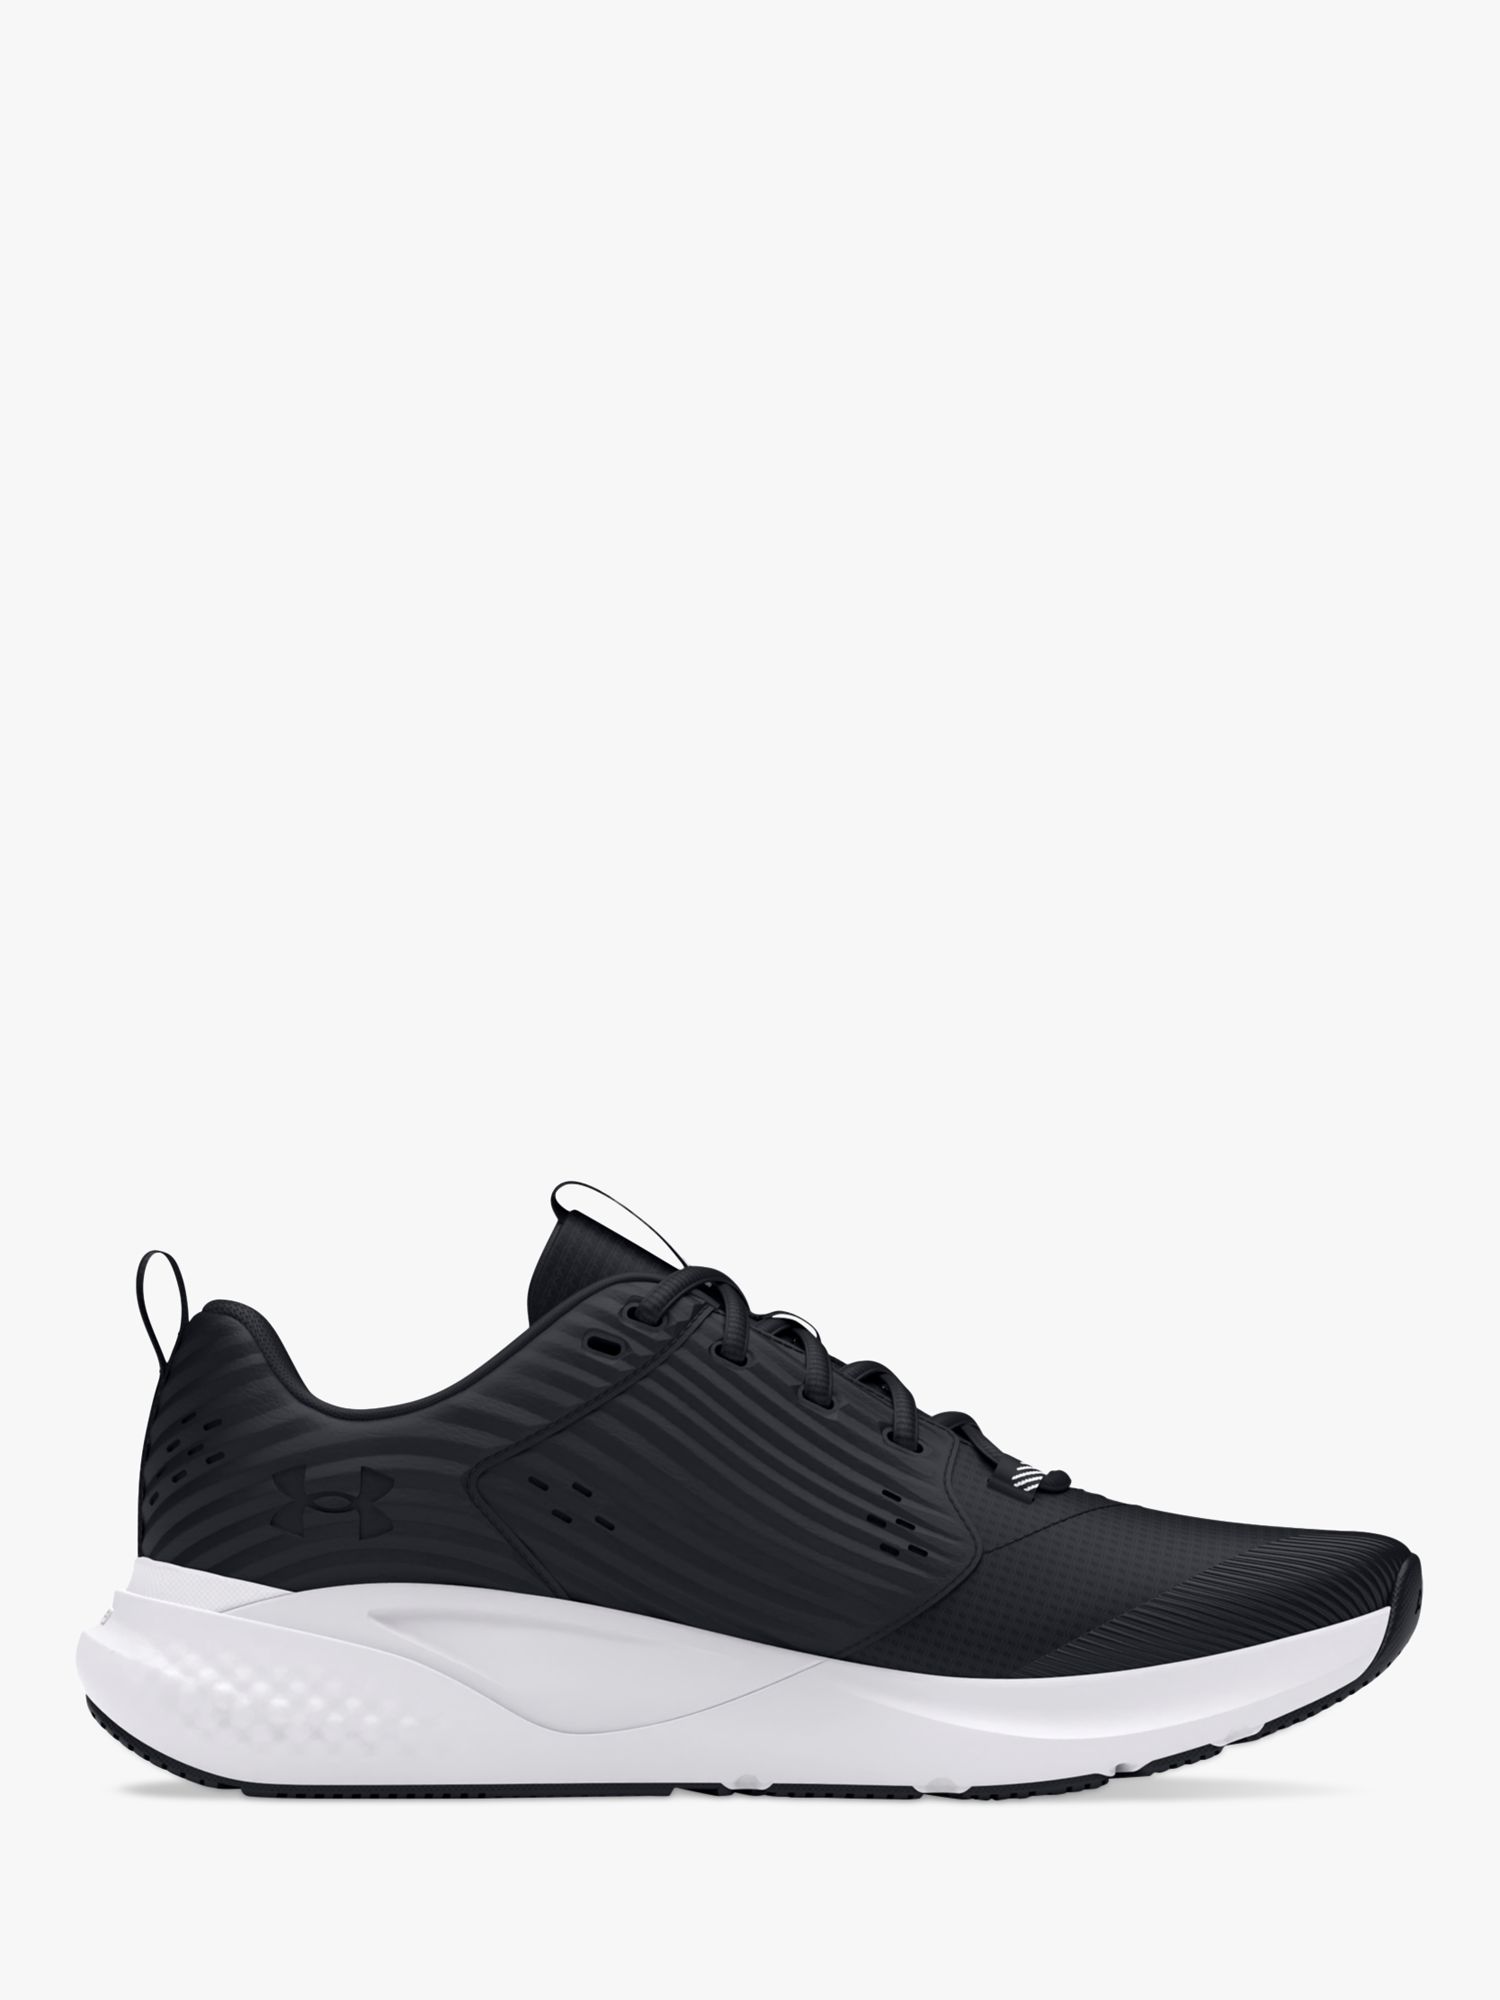 Under Armour Charged Men's Running Shoes, Black/White, 9